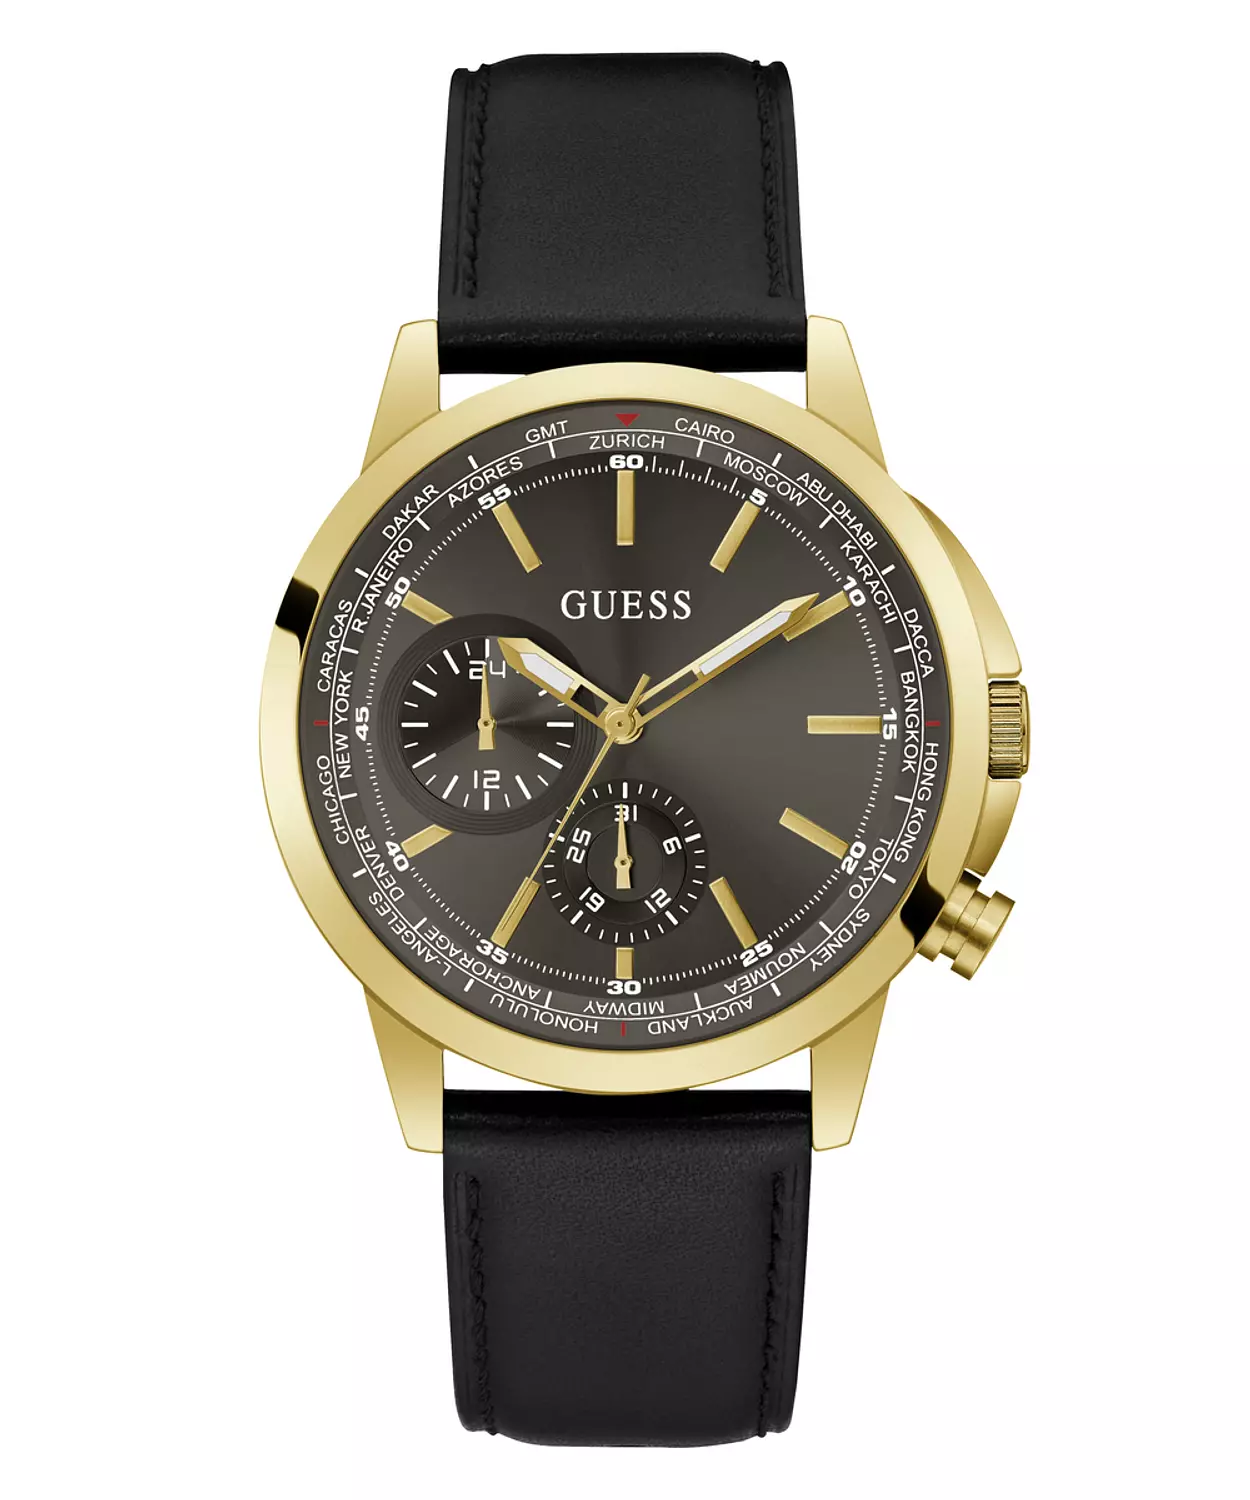 GUESS GW0540G1 ANALOG WATCH For Men Round Shape BlackGenuine Leather Smooth Strap hover image